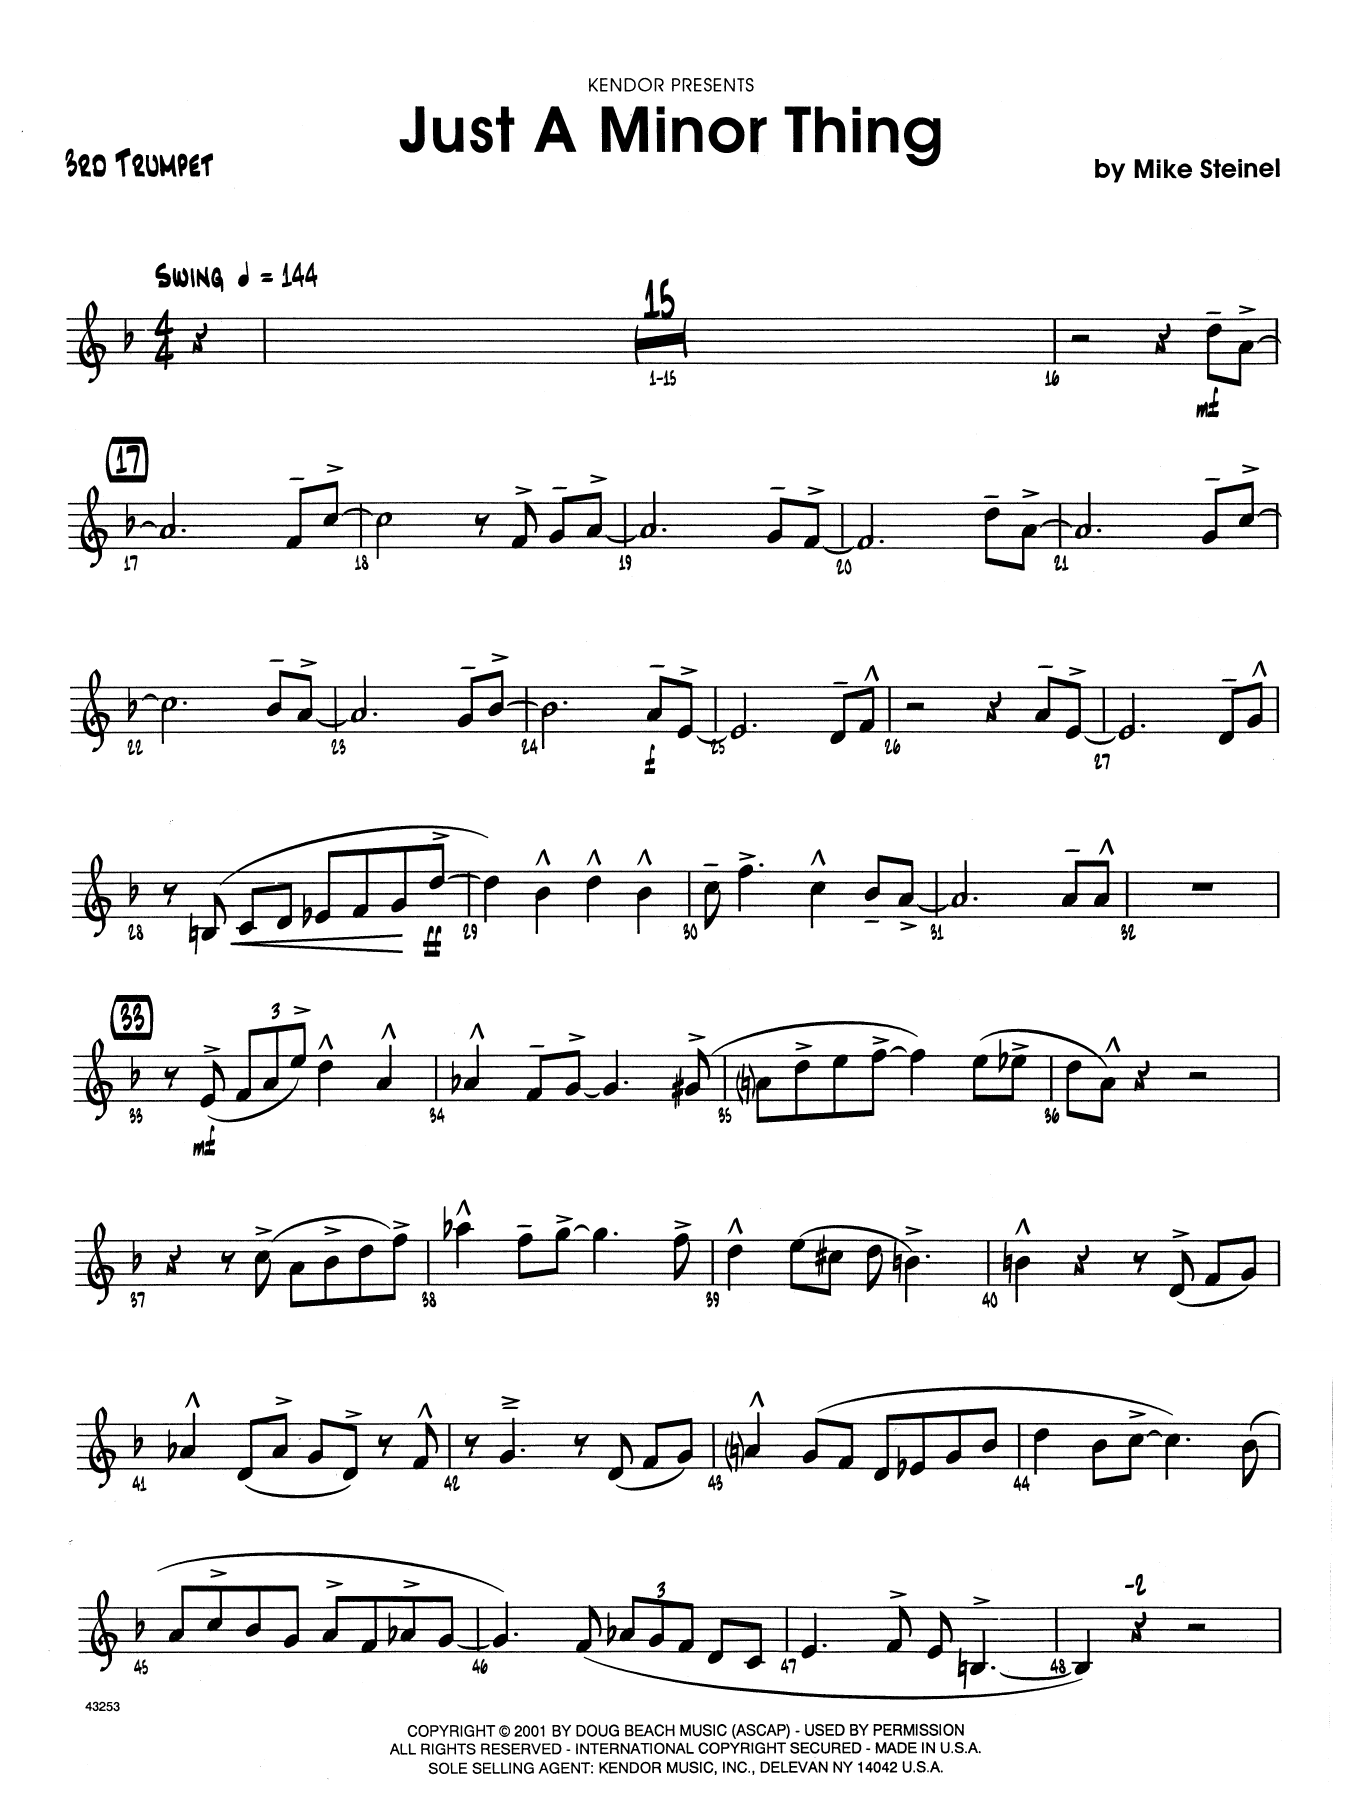 Download Mike Steinel Just A Minor Thing - 3rd Bb Trumpet Sheet Music